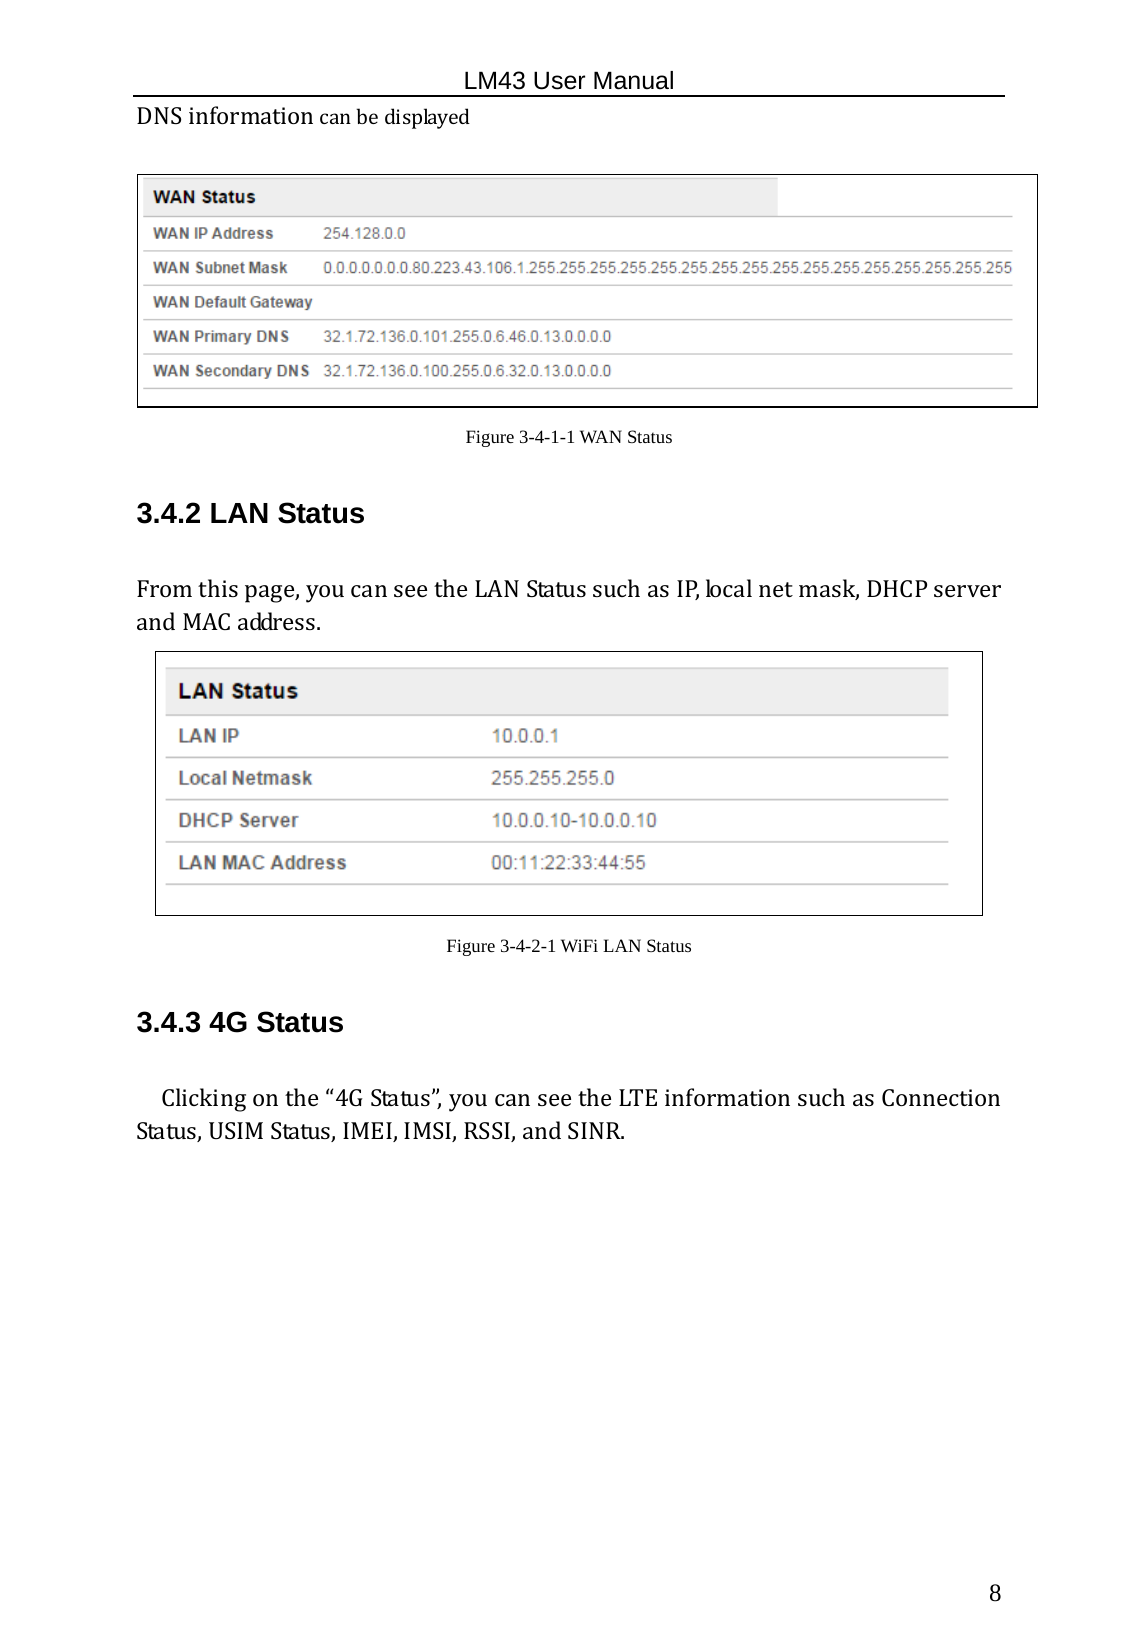                                                   LM43 User Manual  8DNSinformationcanbedisplayed Figure 3-4-1-1 WAN Status 3.4.2 LAN Status Fromthispage,youcanseetheLANStatussuchasIP,localnetmask,DHCPserverandMACaddress. Figure 3-4-2-1 WiFi LAN Status 3.4.3 4G Status Clickingonthe“4GStatus”,youcanseetheLTEinformationsuchasConnectionStatus,USIMStatus,IMEI,IMSI,RSSI,andSINR.